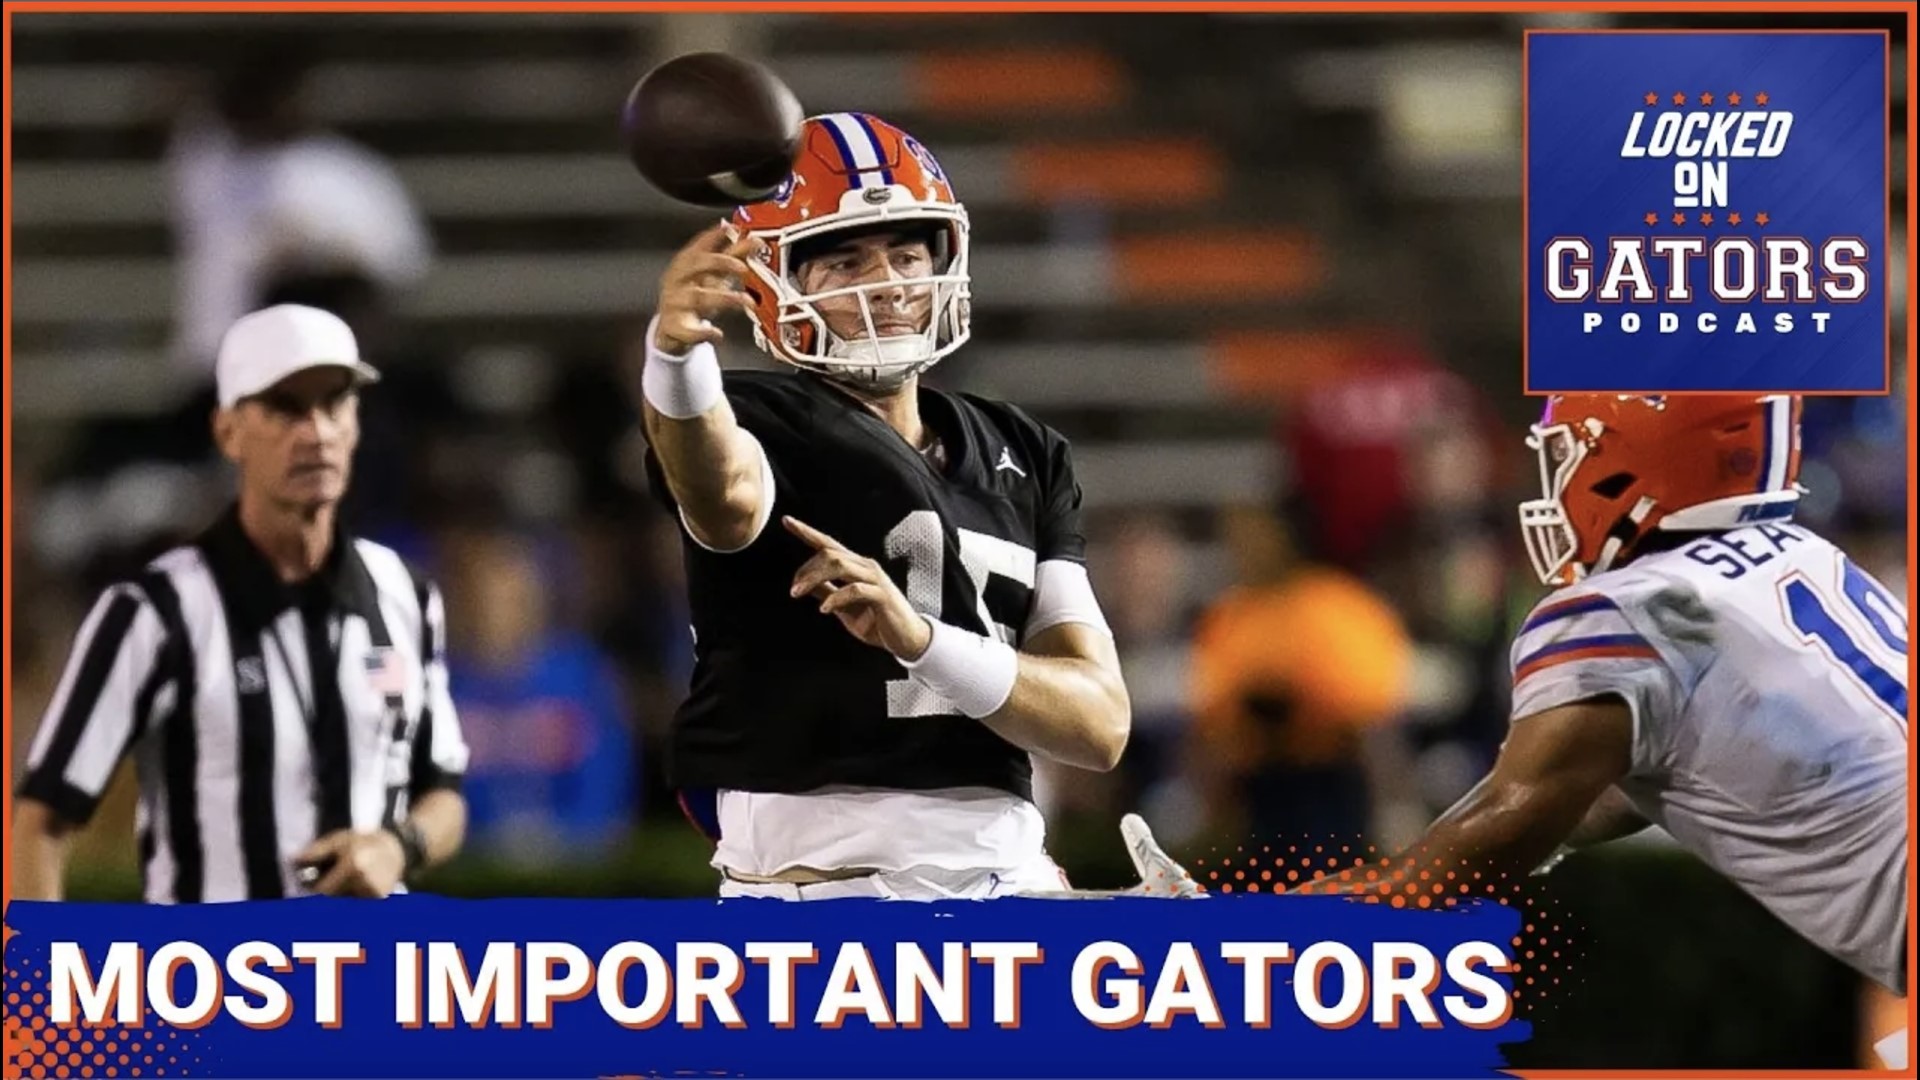 The Gators will go into the 2023 college football season with Graham Mertz as their starting quarterback but who are the most important Florida Gators on the roster?